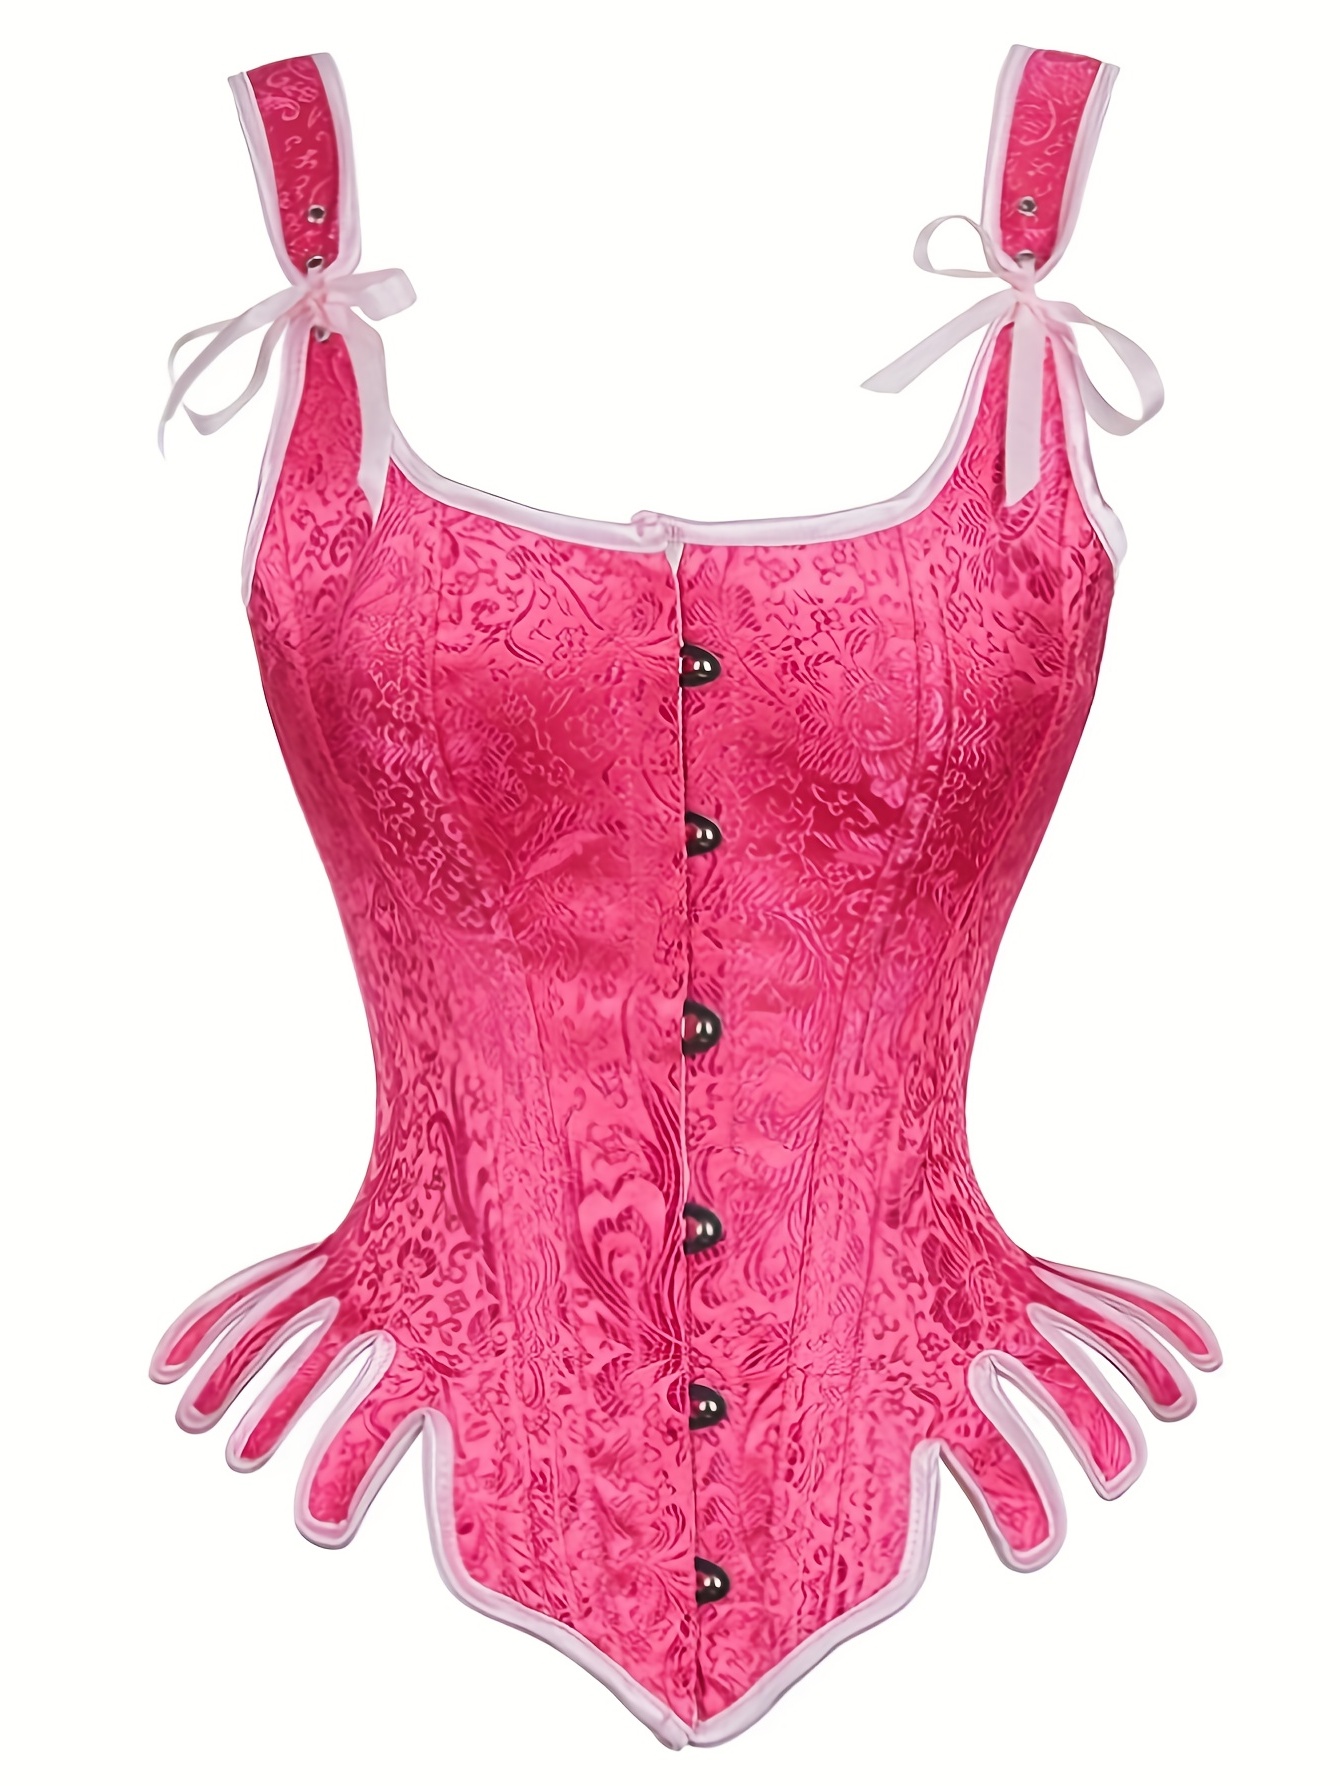 Find Cheap, Fashionable and Slimming vintage corsets and girdles 